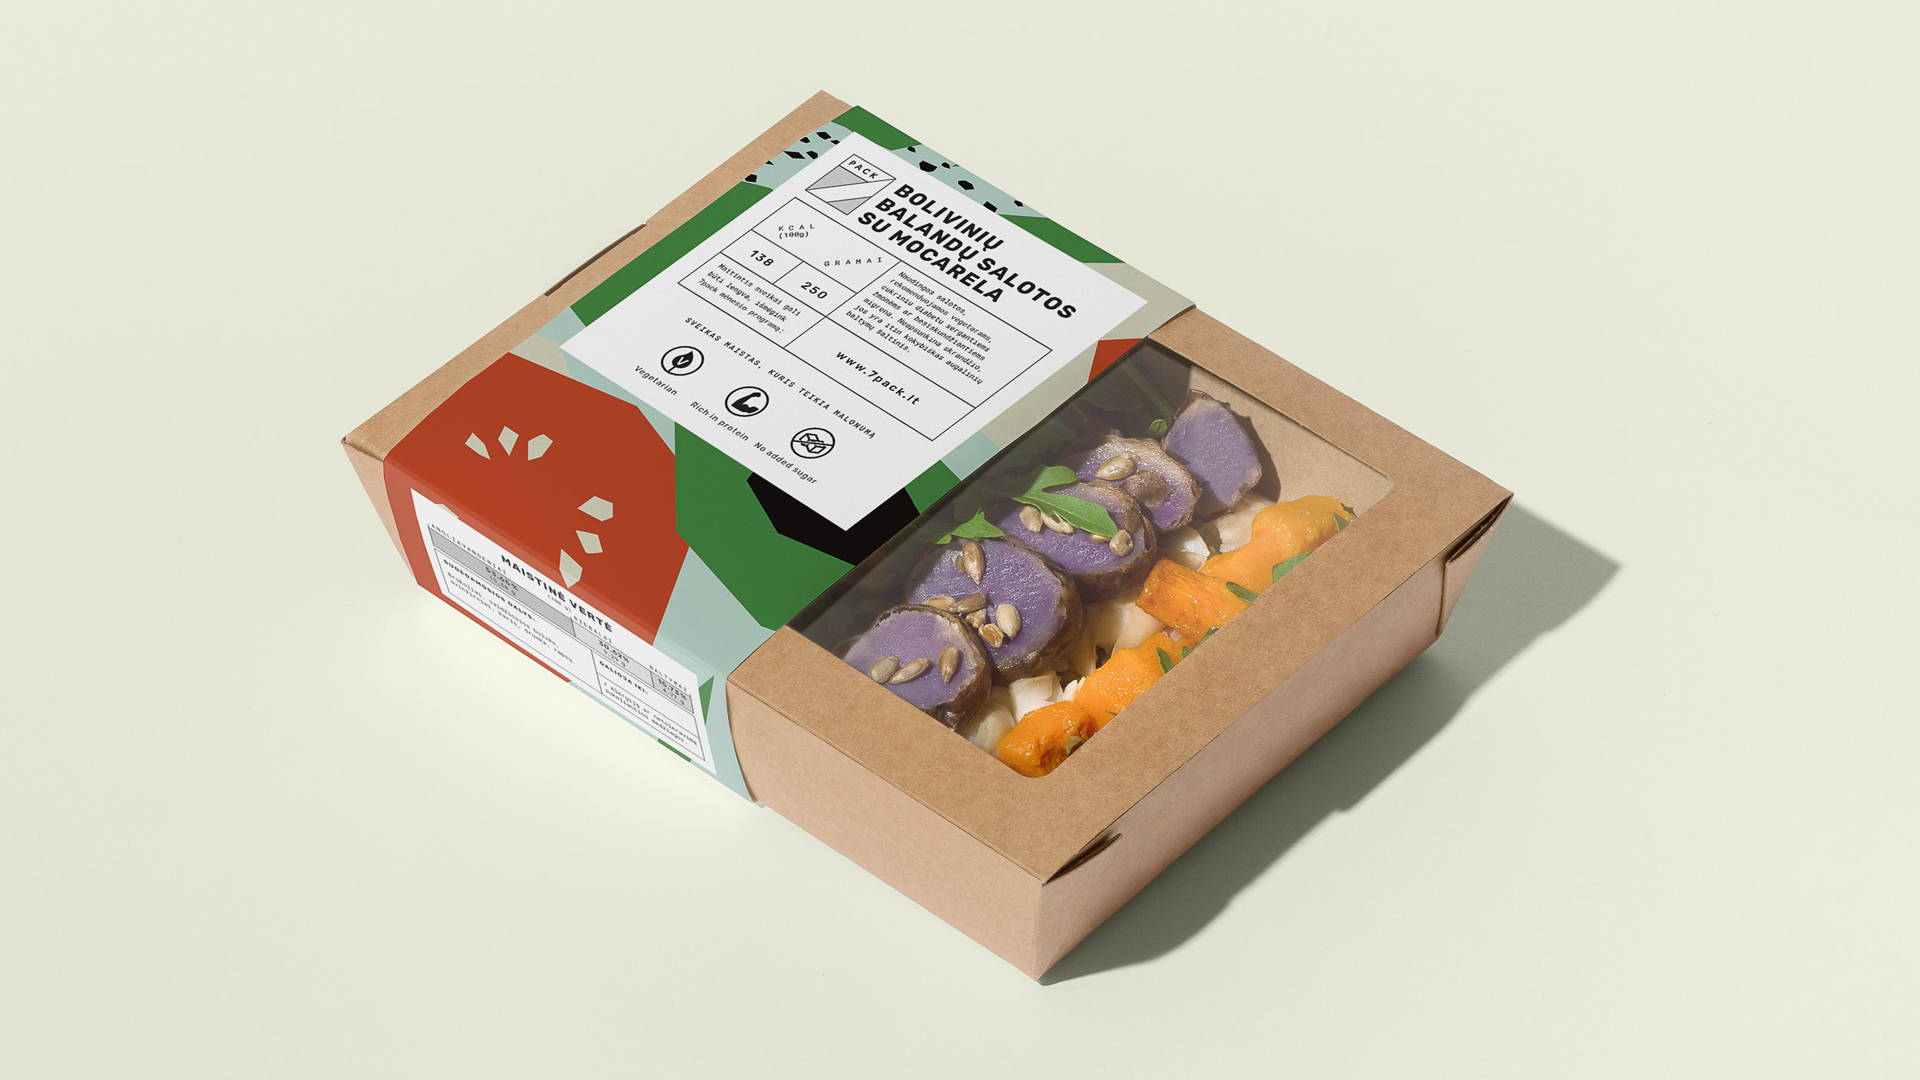 Featured image for This Healthy Food Brand Takes a Modern Approach With Its Packaging